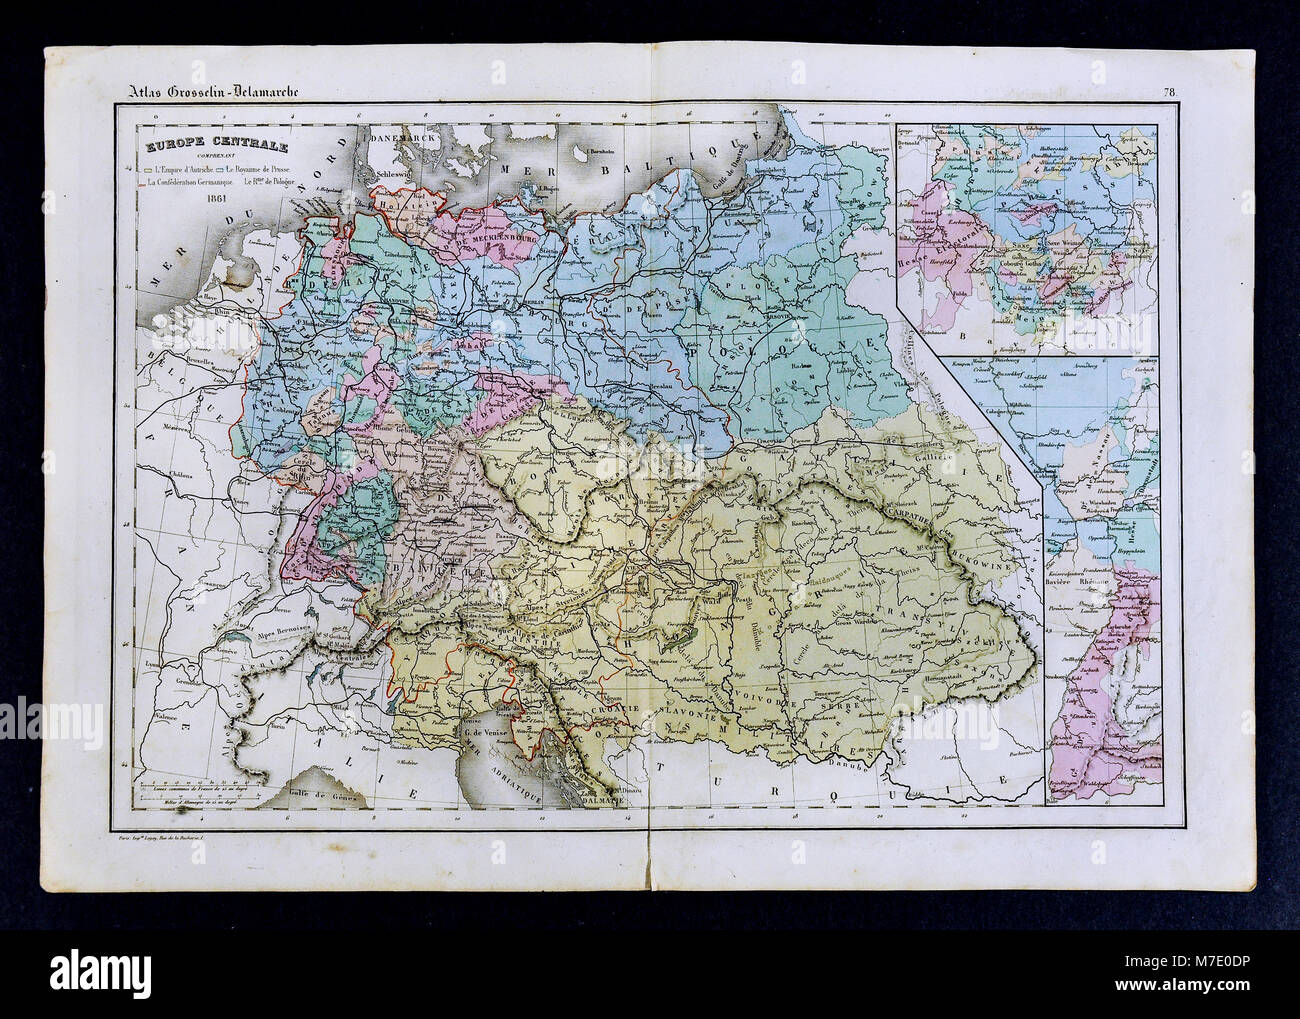 1861 Delamarche Map of Central Europe including Germany, Austria, Hungary, Prussia, Poland Stock Photo